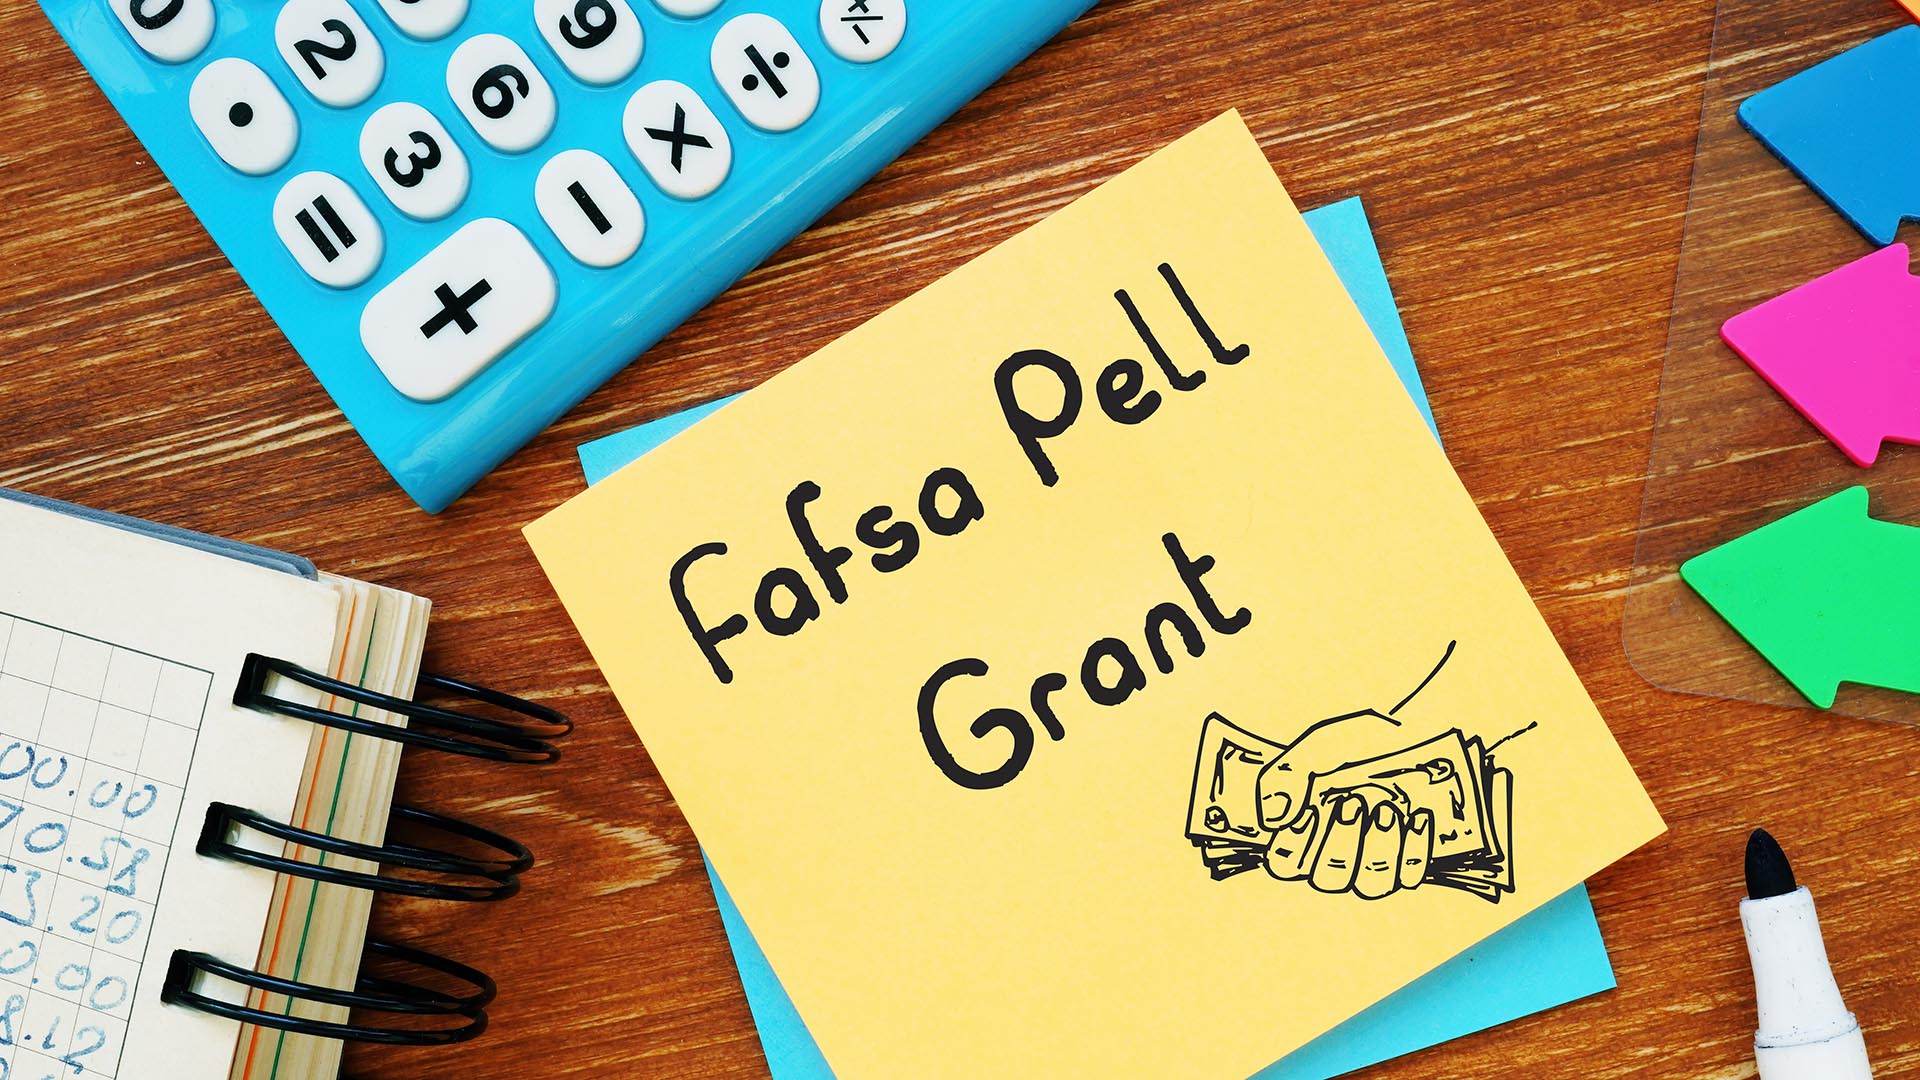 The Pell Grant turns 50